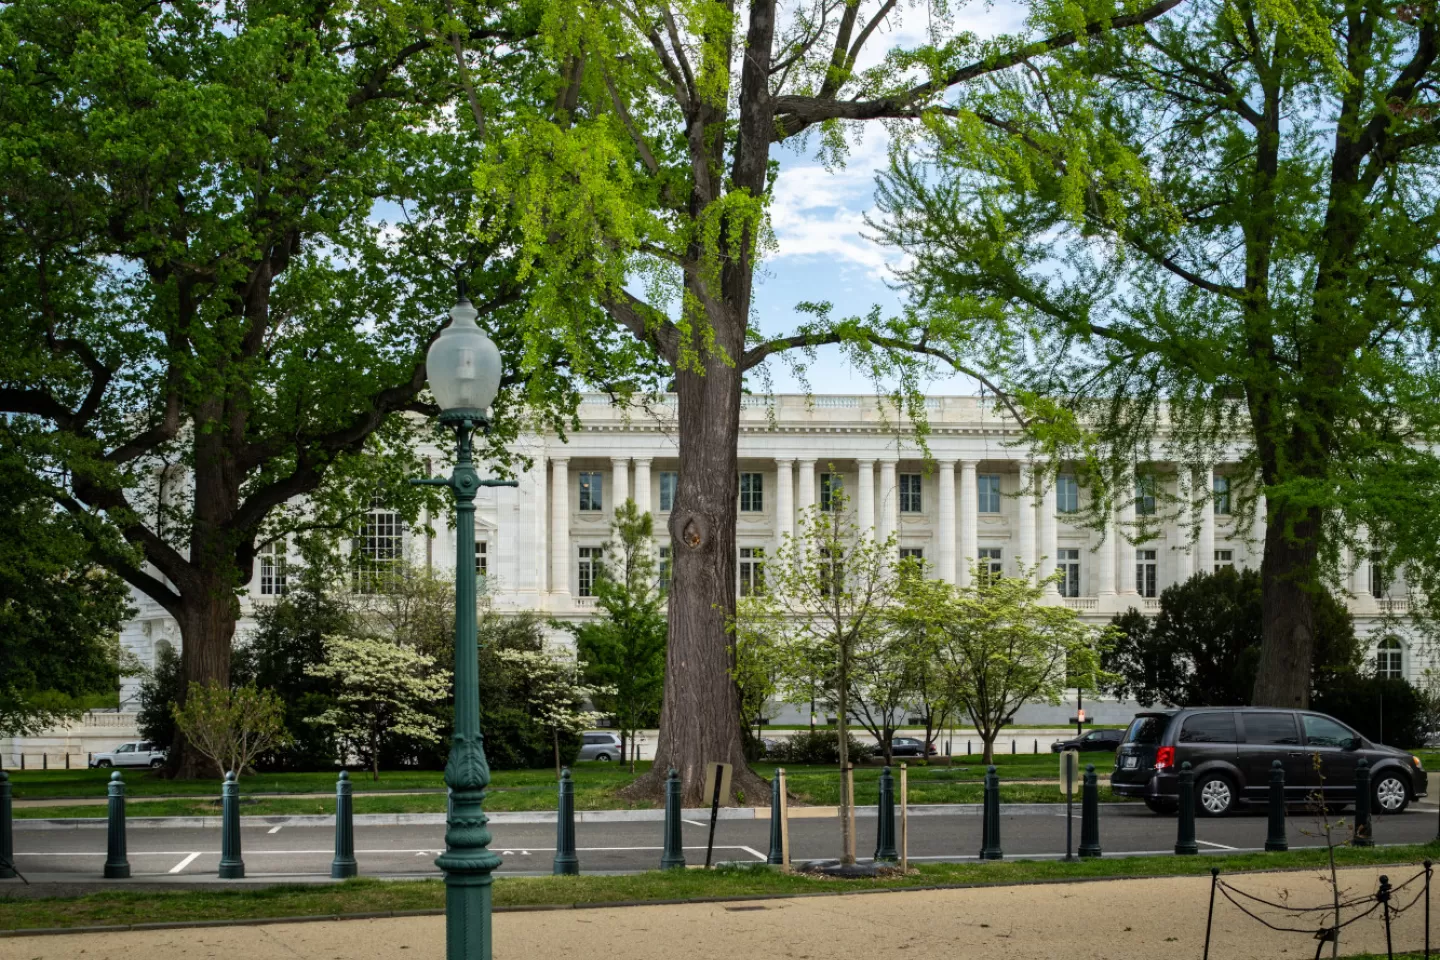 A ginkgo tree on the U.S. Capitol campus.